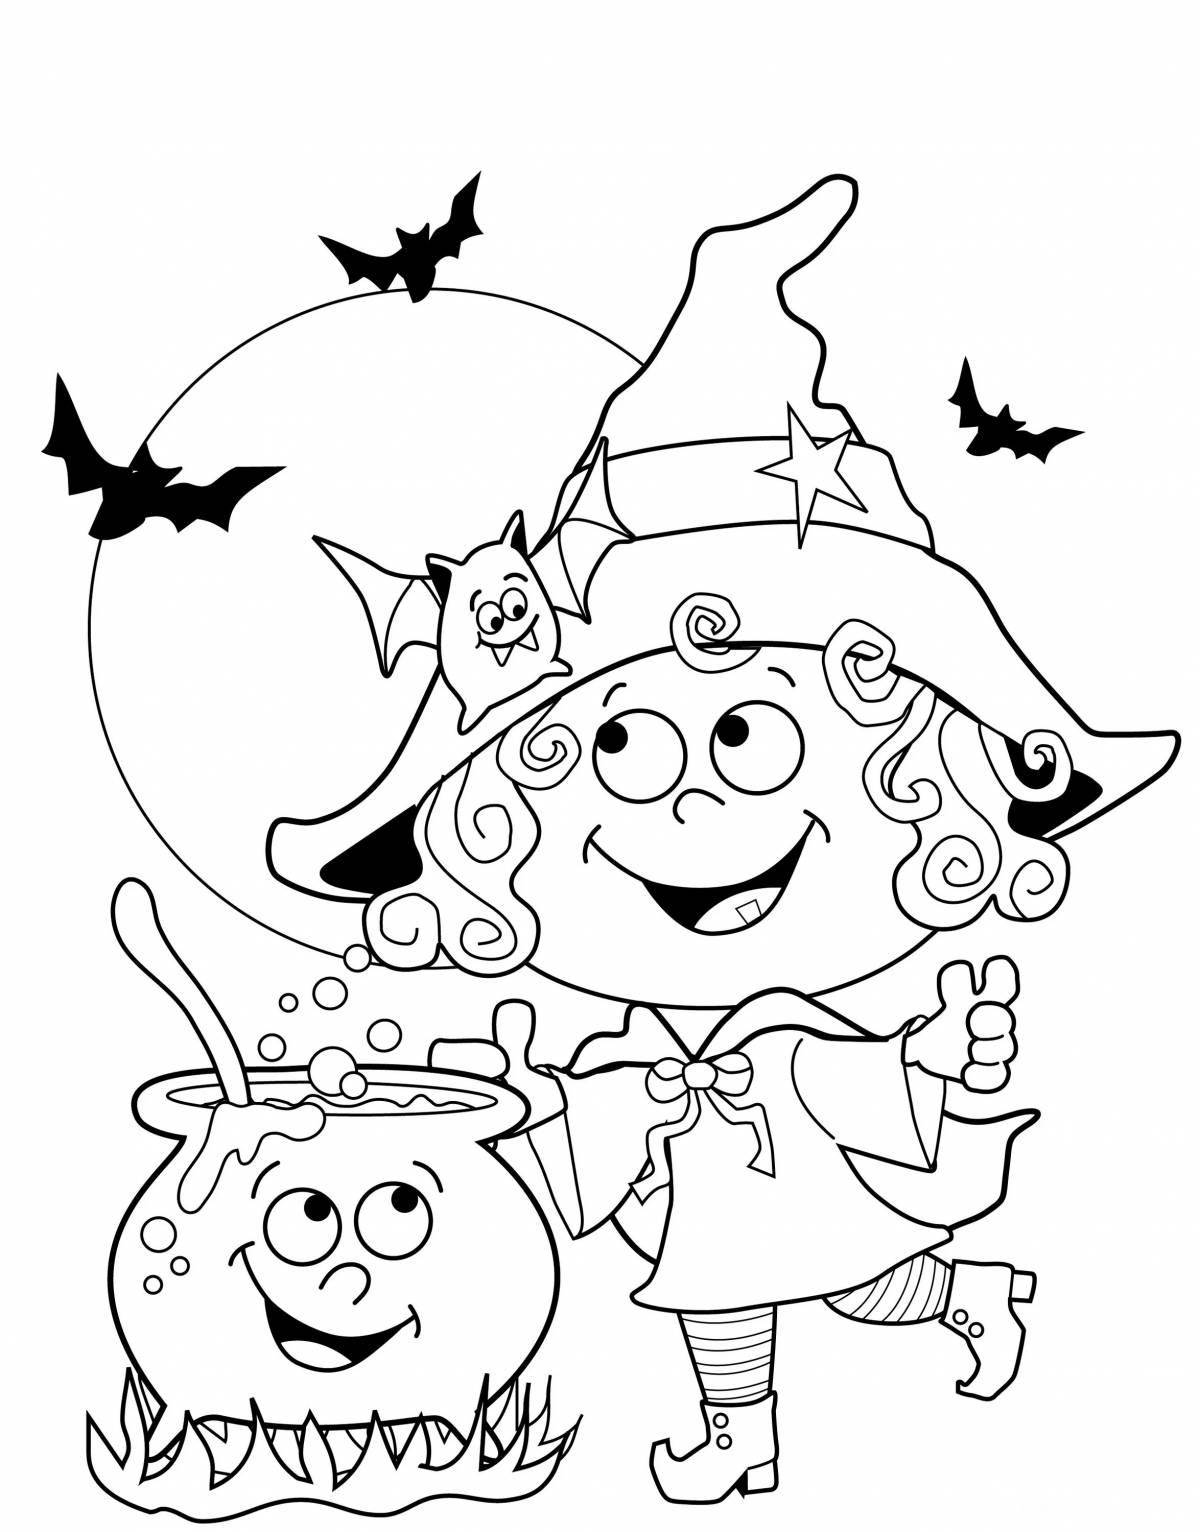 Chilling halloween coloring book for girls